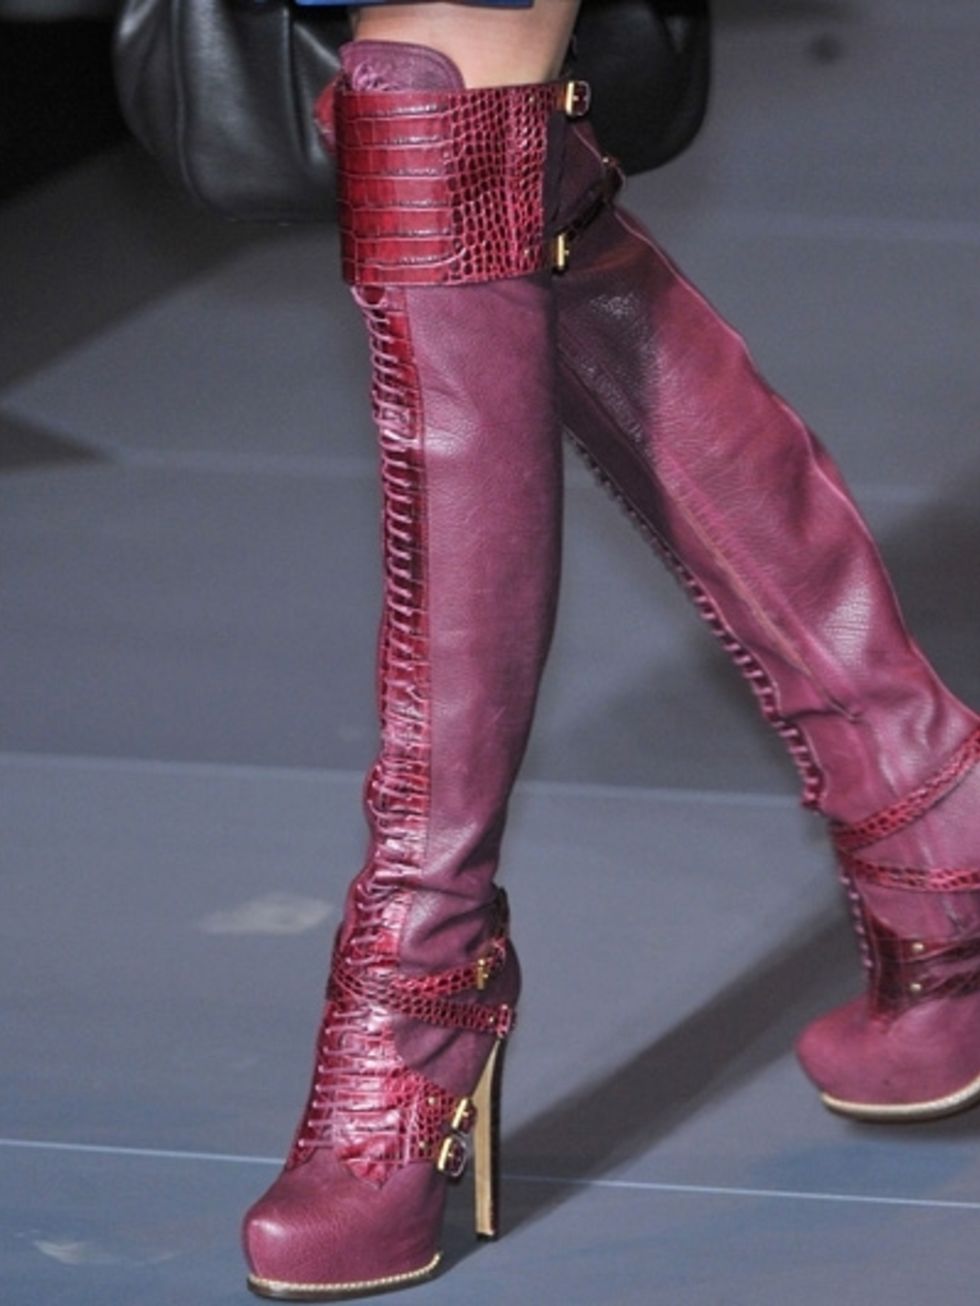 Footwear, Red, Joint, Pink, Magenta, Leather, Carmine, Fashion, Maroon, Boot, 